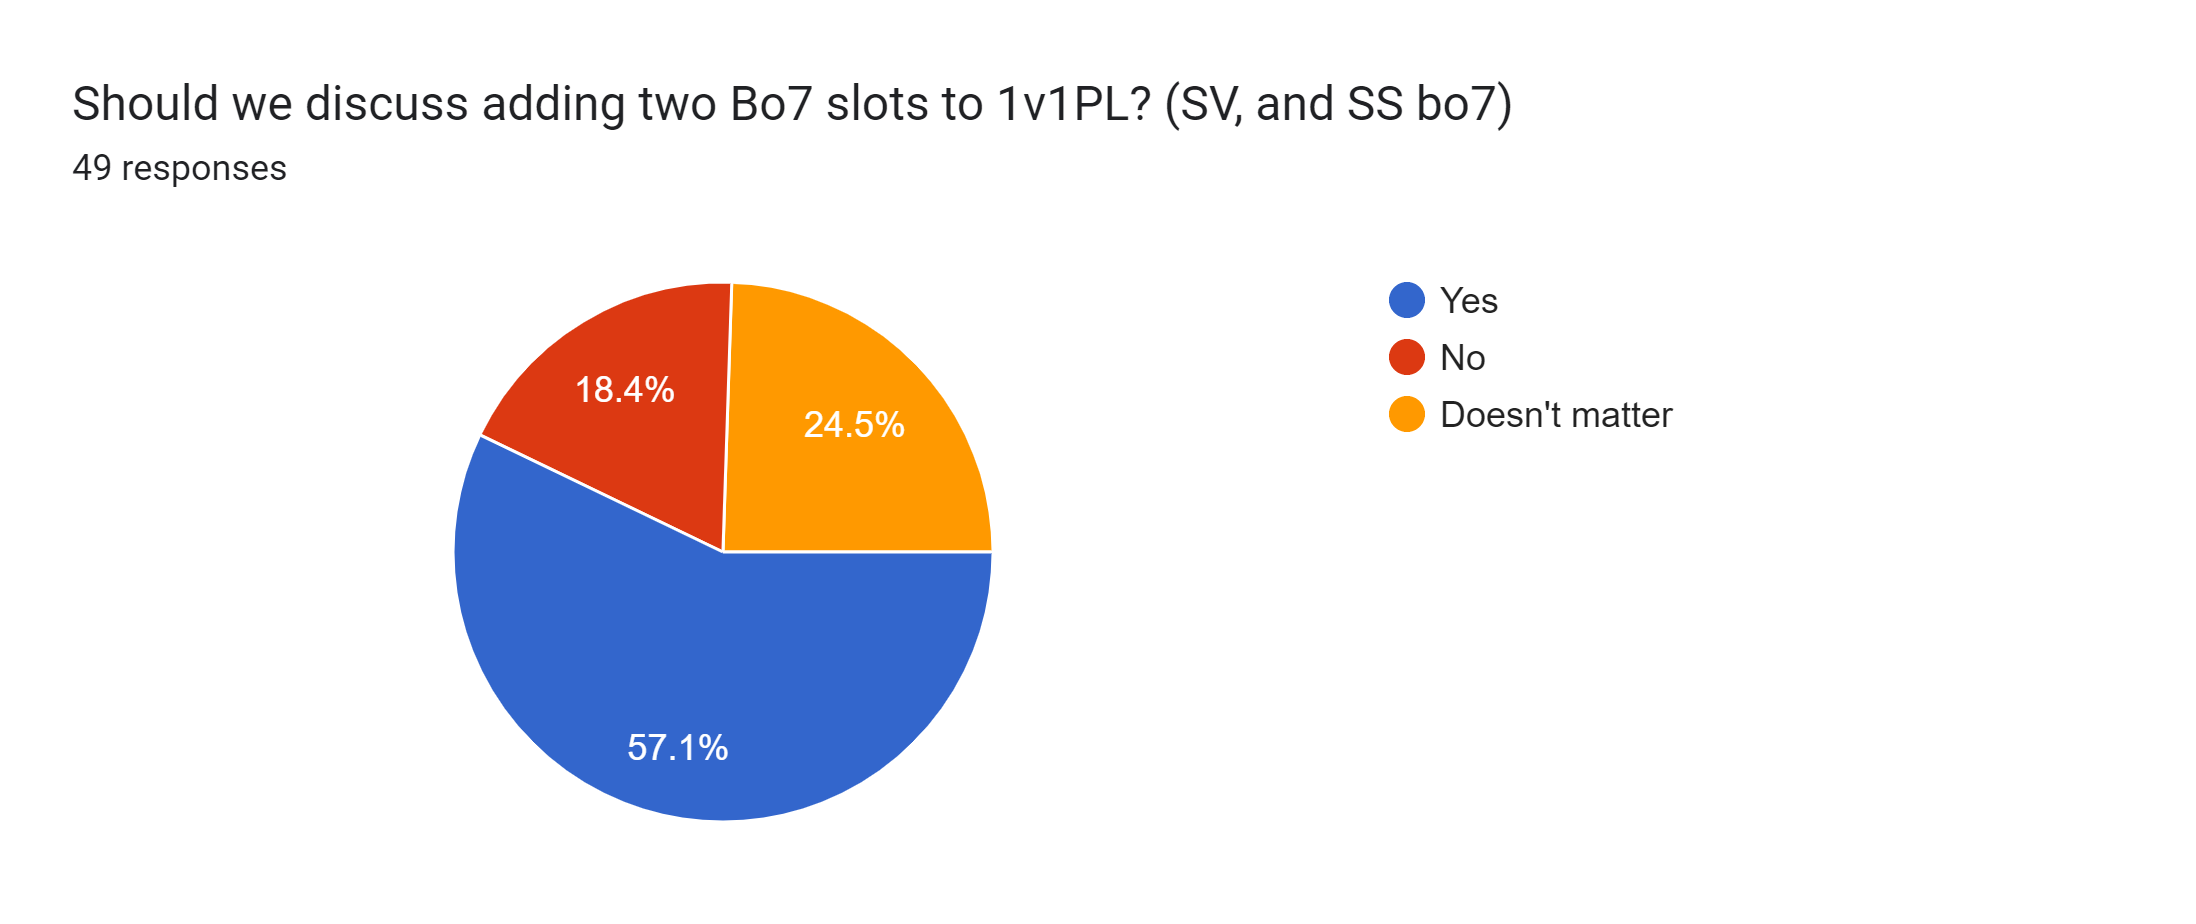 Forms response chart. Question title: Should we discuss adding two Bo7 slots to 1v1PL? (SV, and SS bo7). Number of responses: 49 responses.